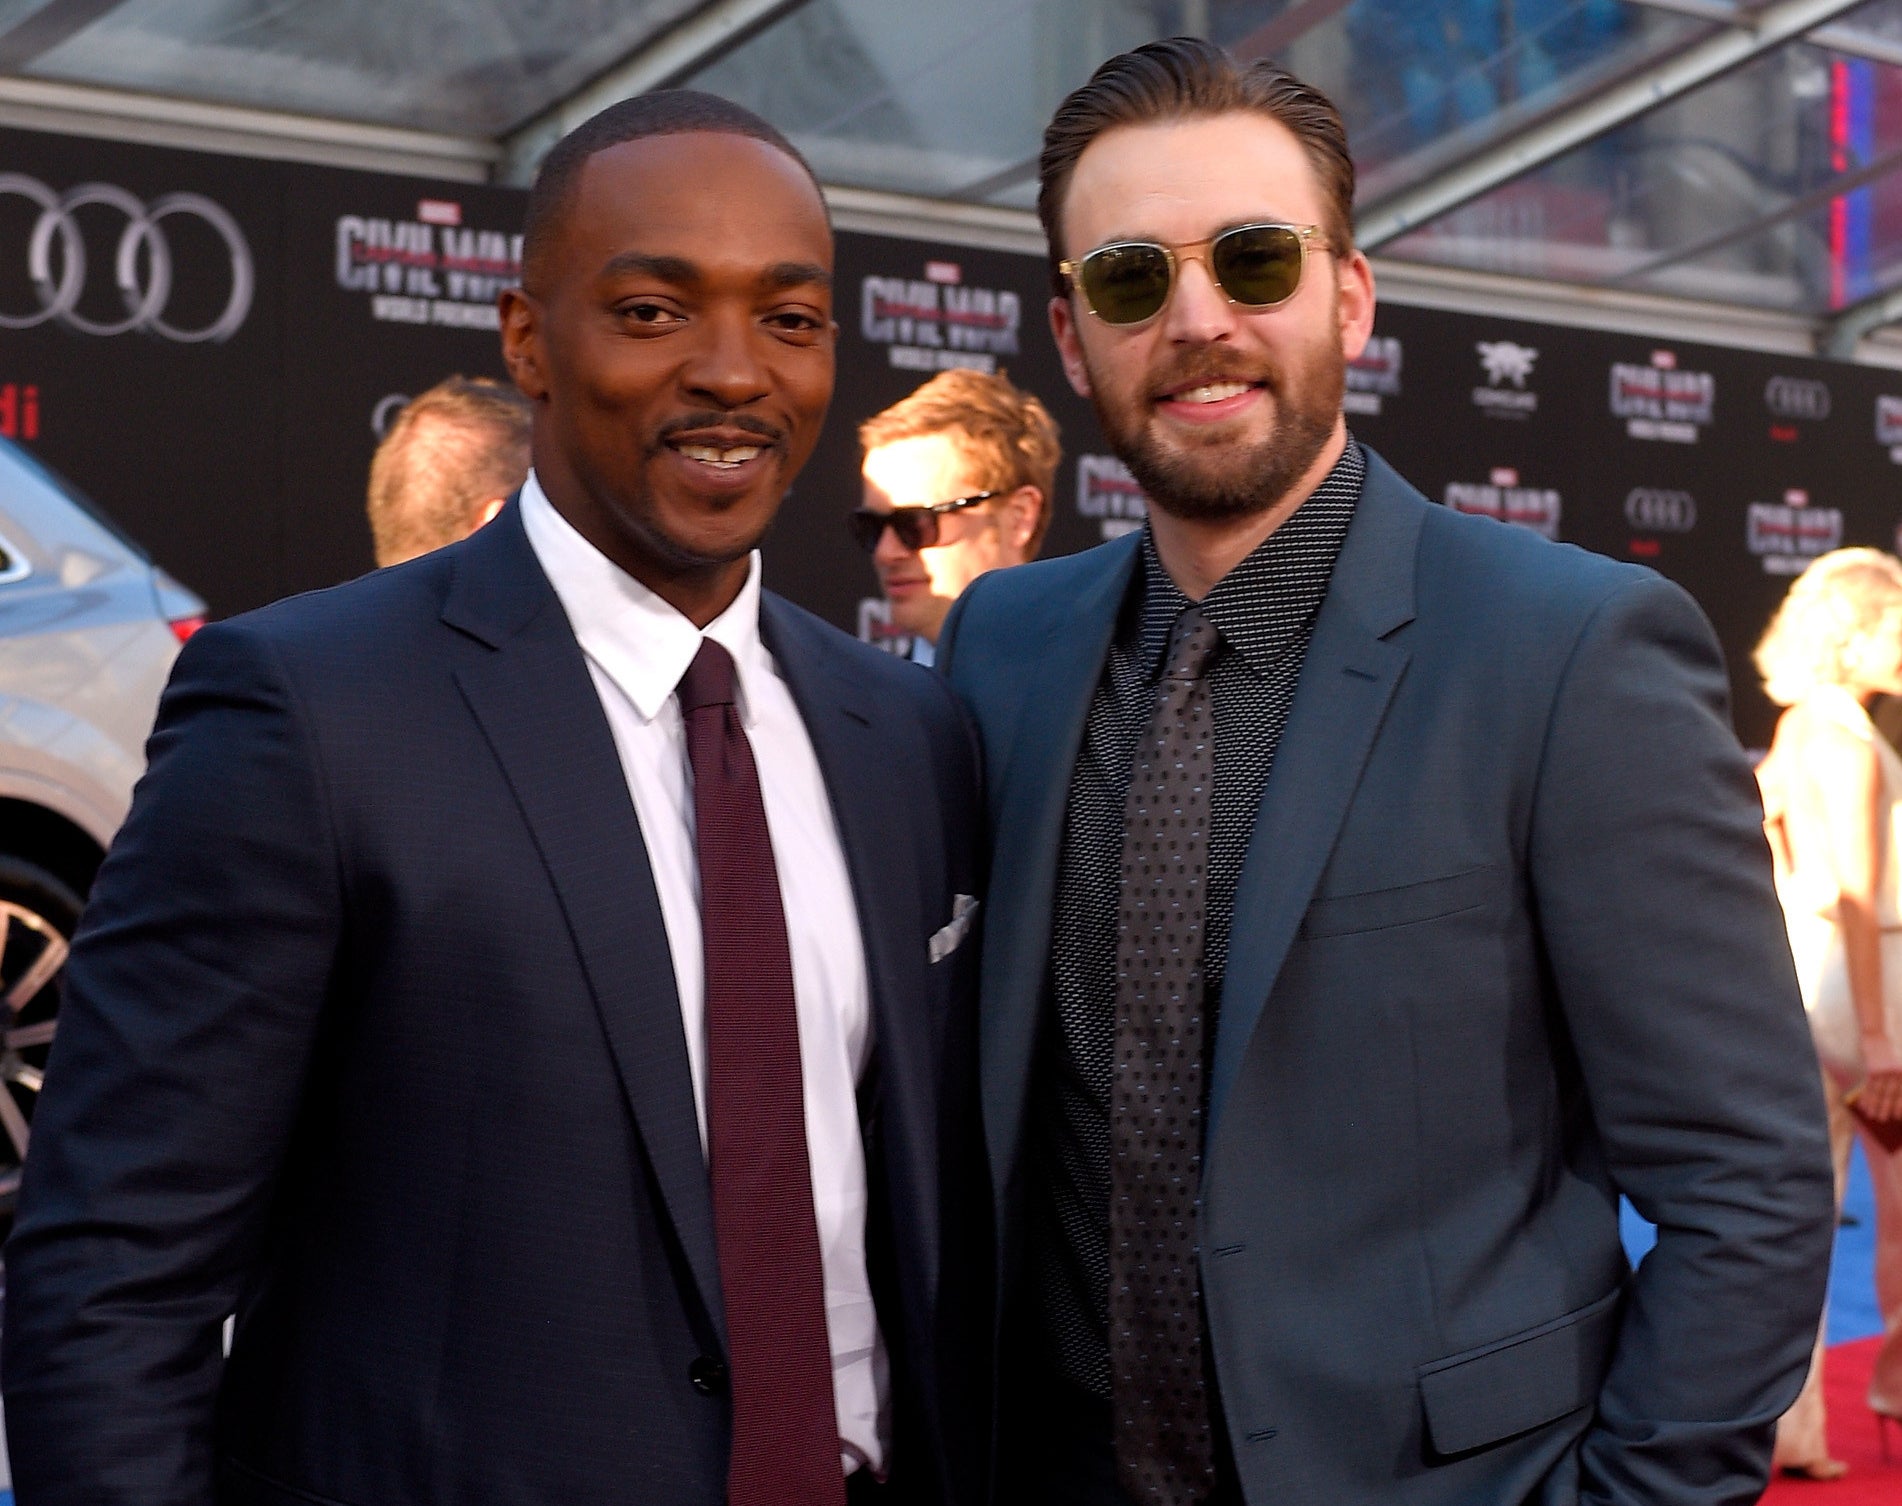 Chris and Anthony pose at a premiere